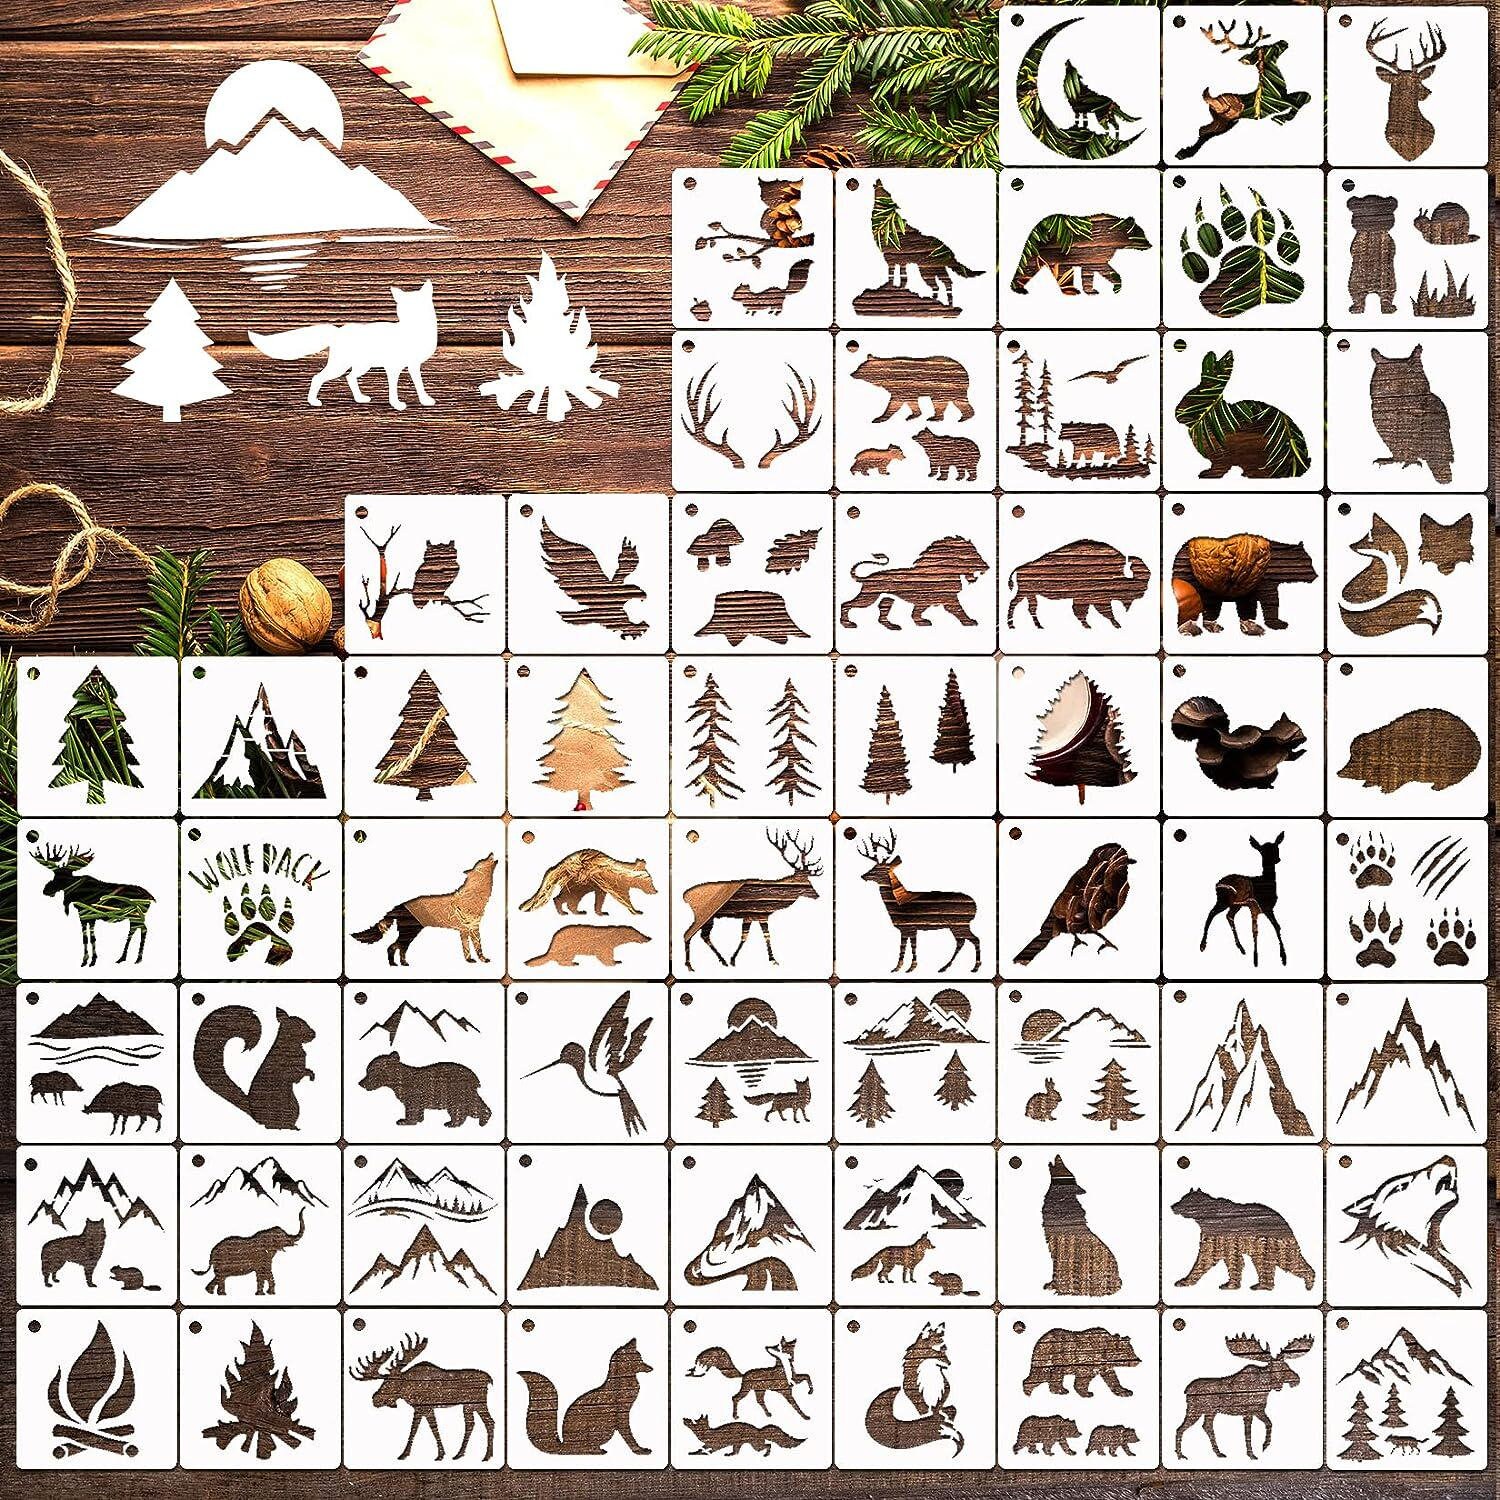  11 Pcs Deer Stencils Forest Mountain Tree Deer Head Stencils  for Wood Burning Stencil Template Stencils for Painting on Wood Crafts Home  Decors (Wolf) : Arts, Crafts & Sewing